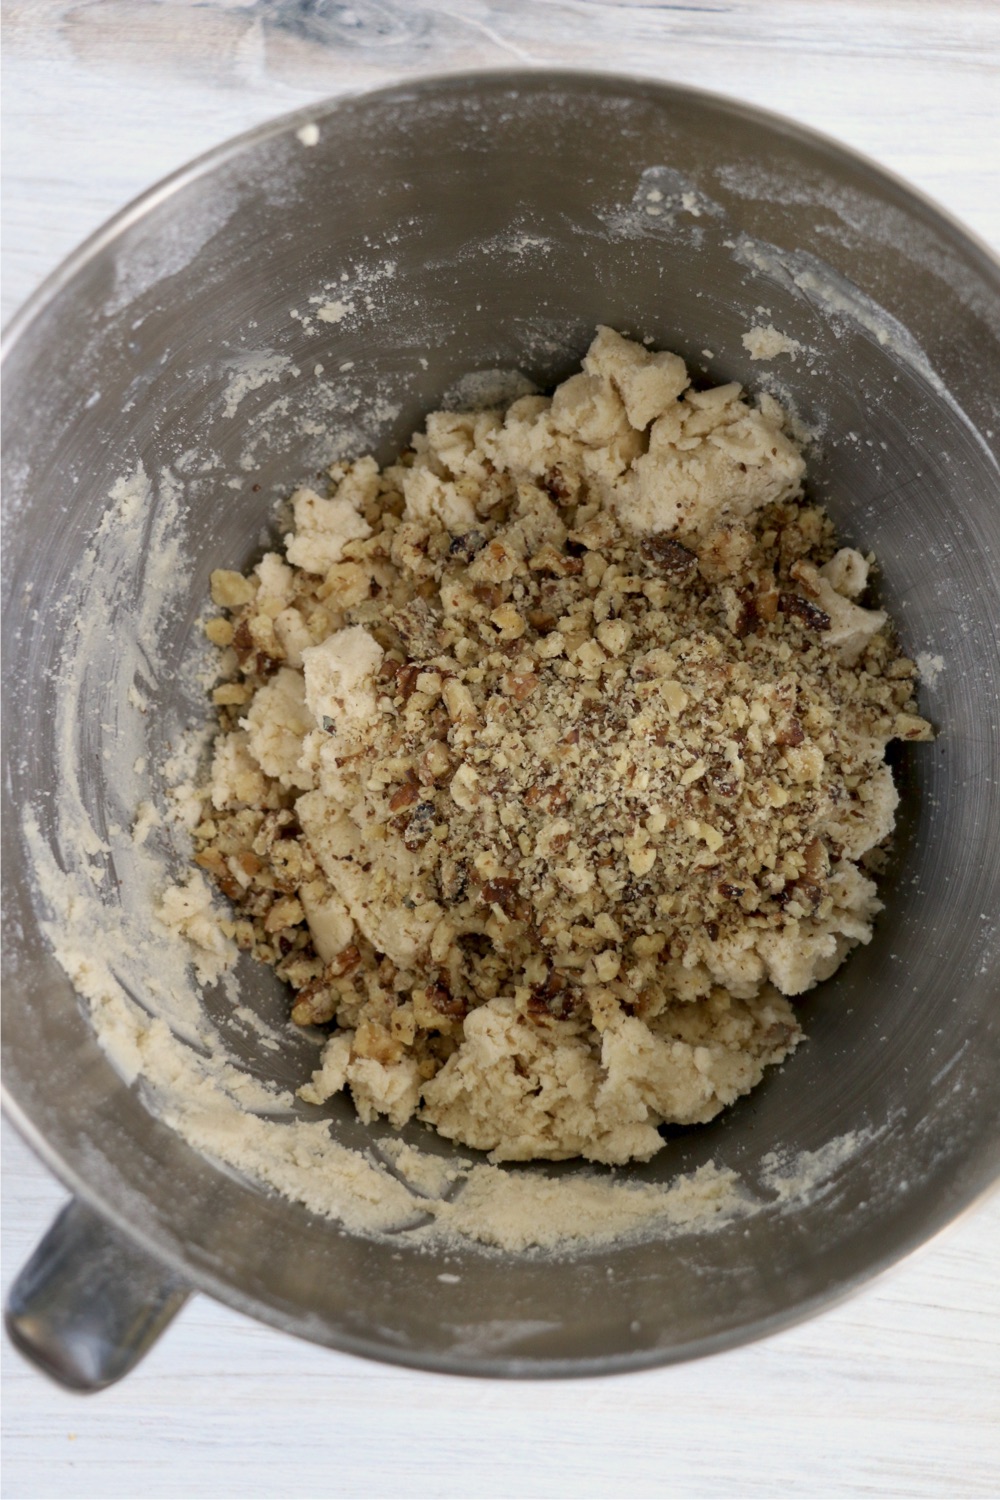 Adding crushed walnuts to cookie dough